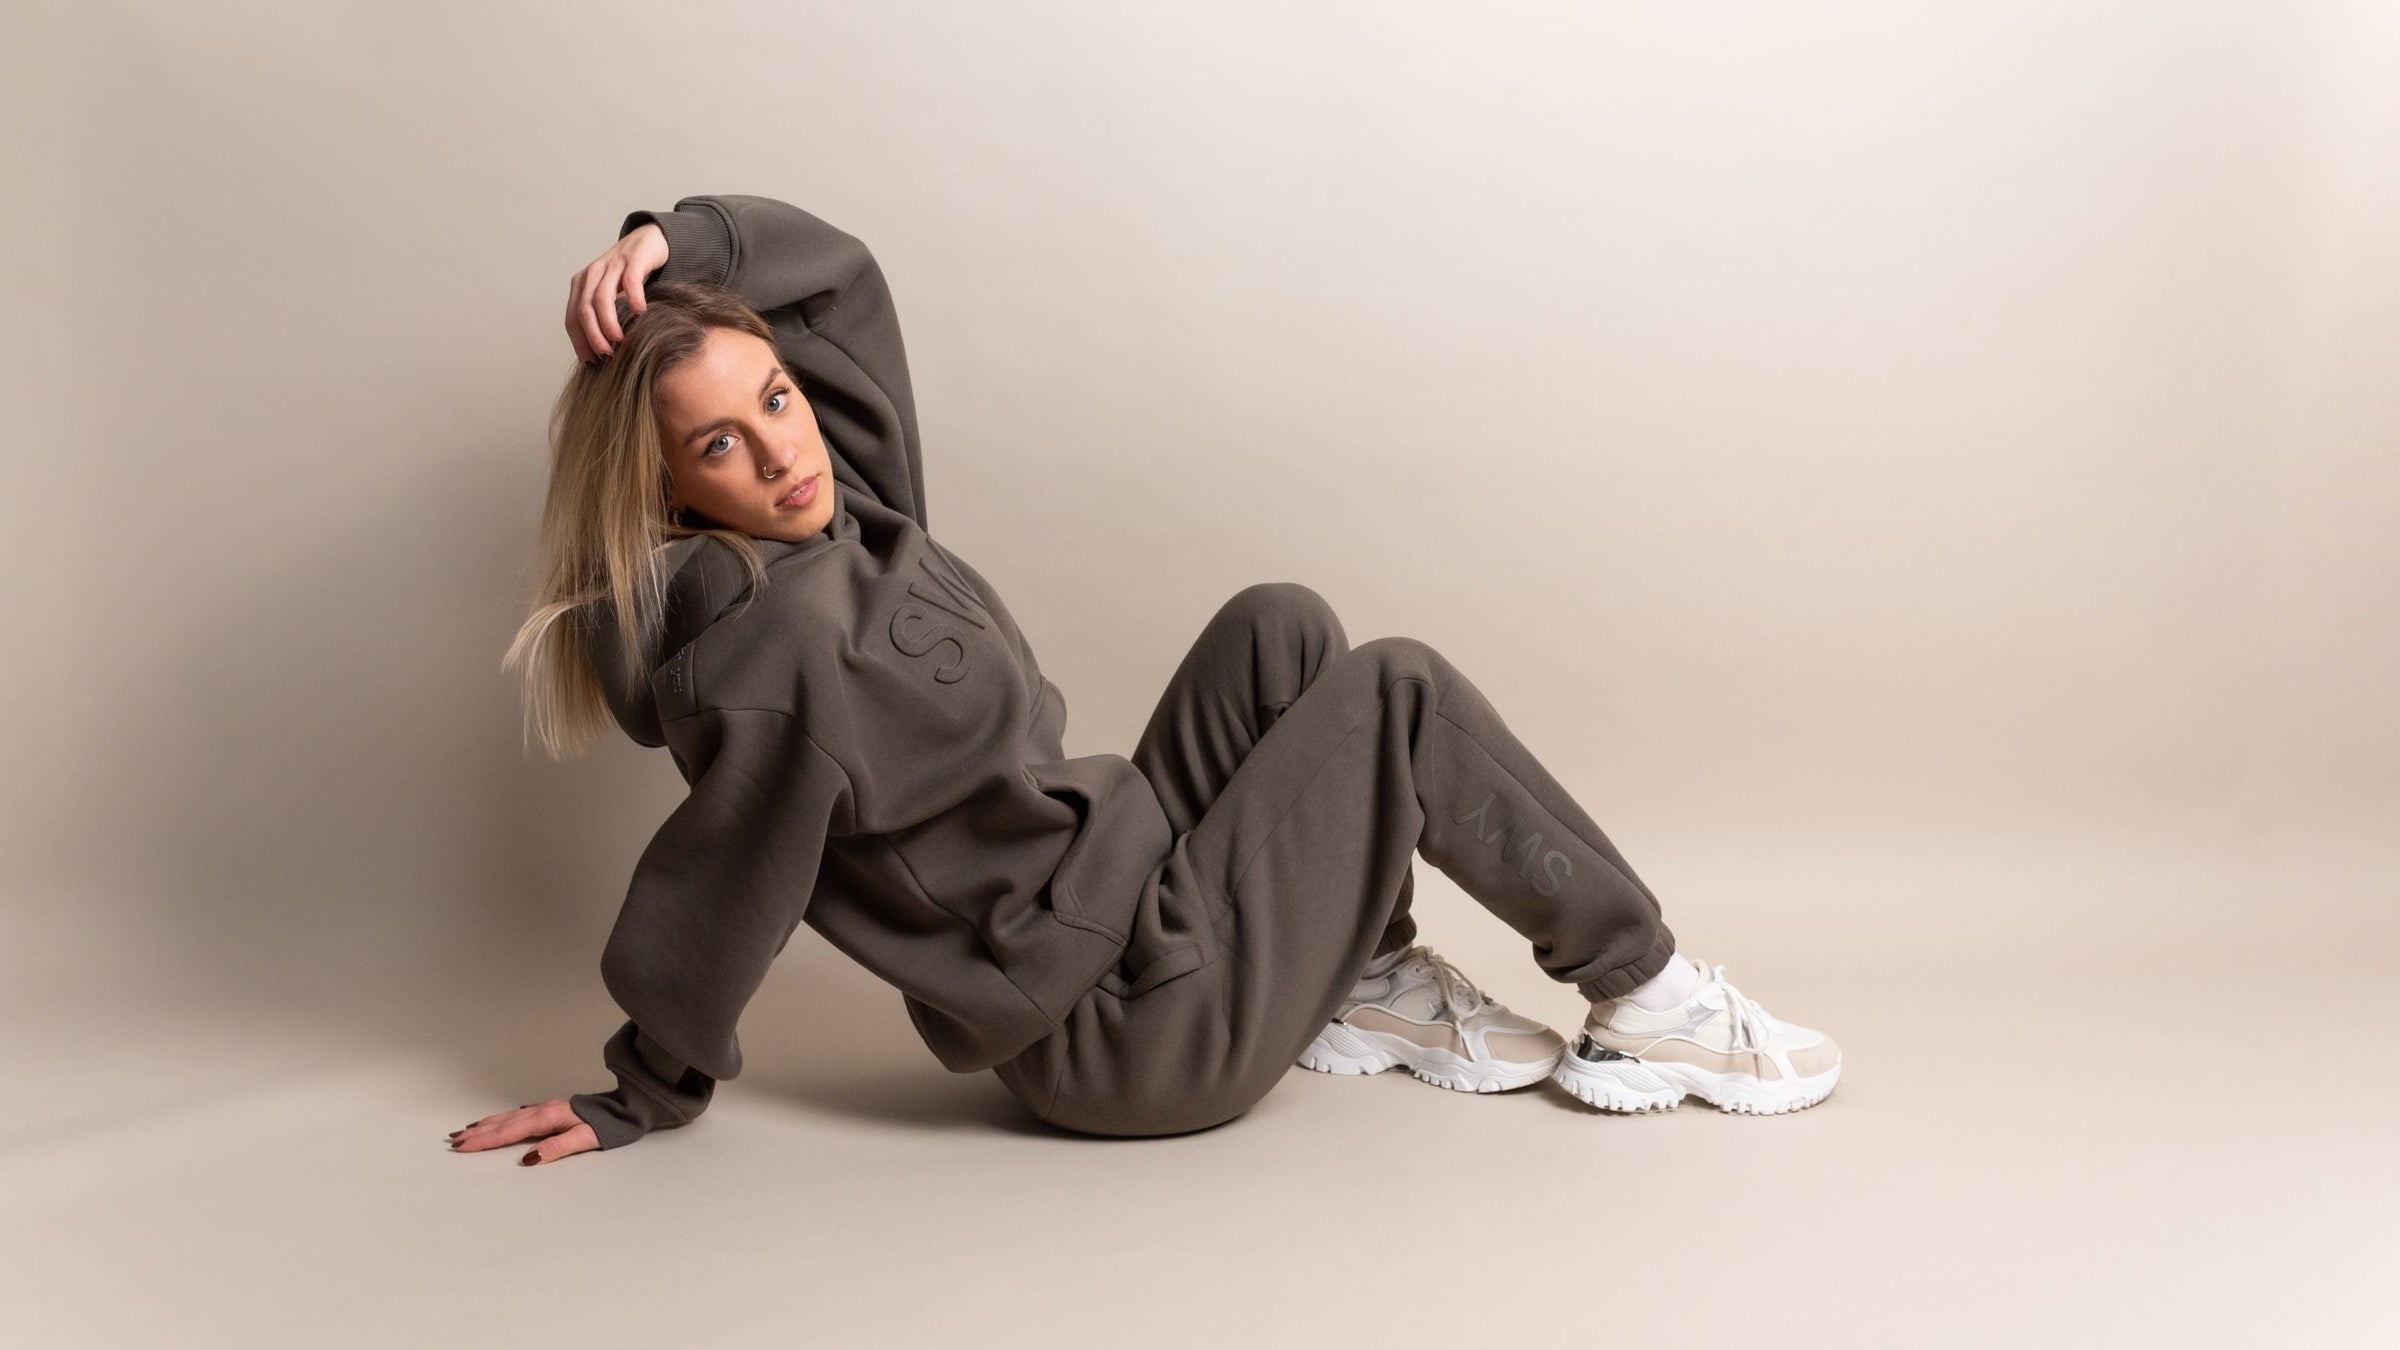 Highly requested swy tracksuits are made and designed in the EU. The Turkish cotton offers an outstanding comfy and warm feeling